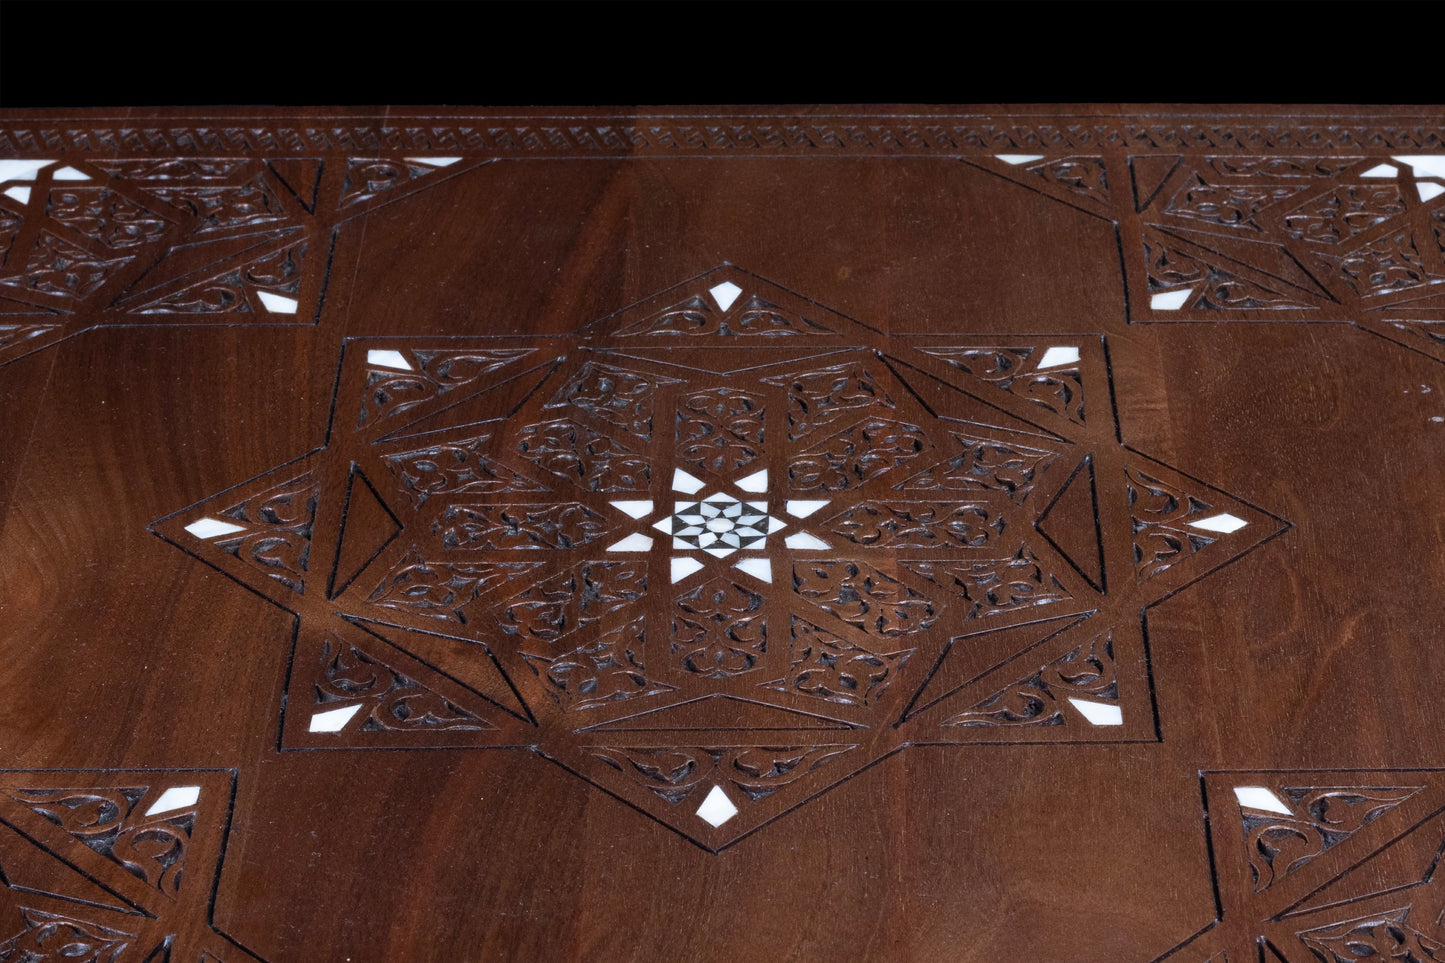 Hand Engraved Wooden Table, inlayed with mother of pearl